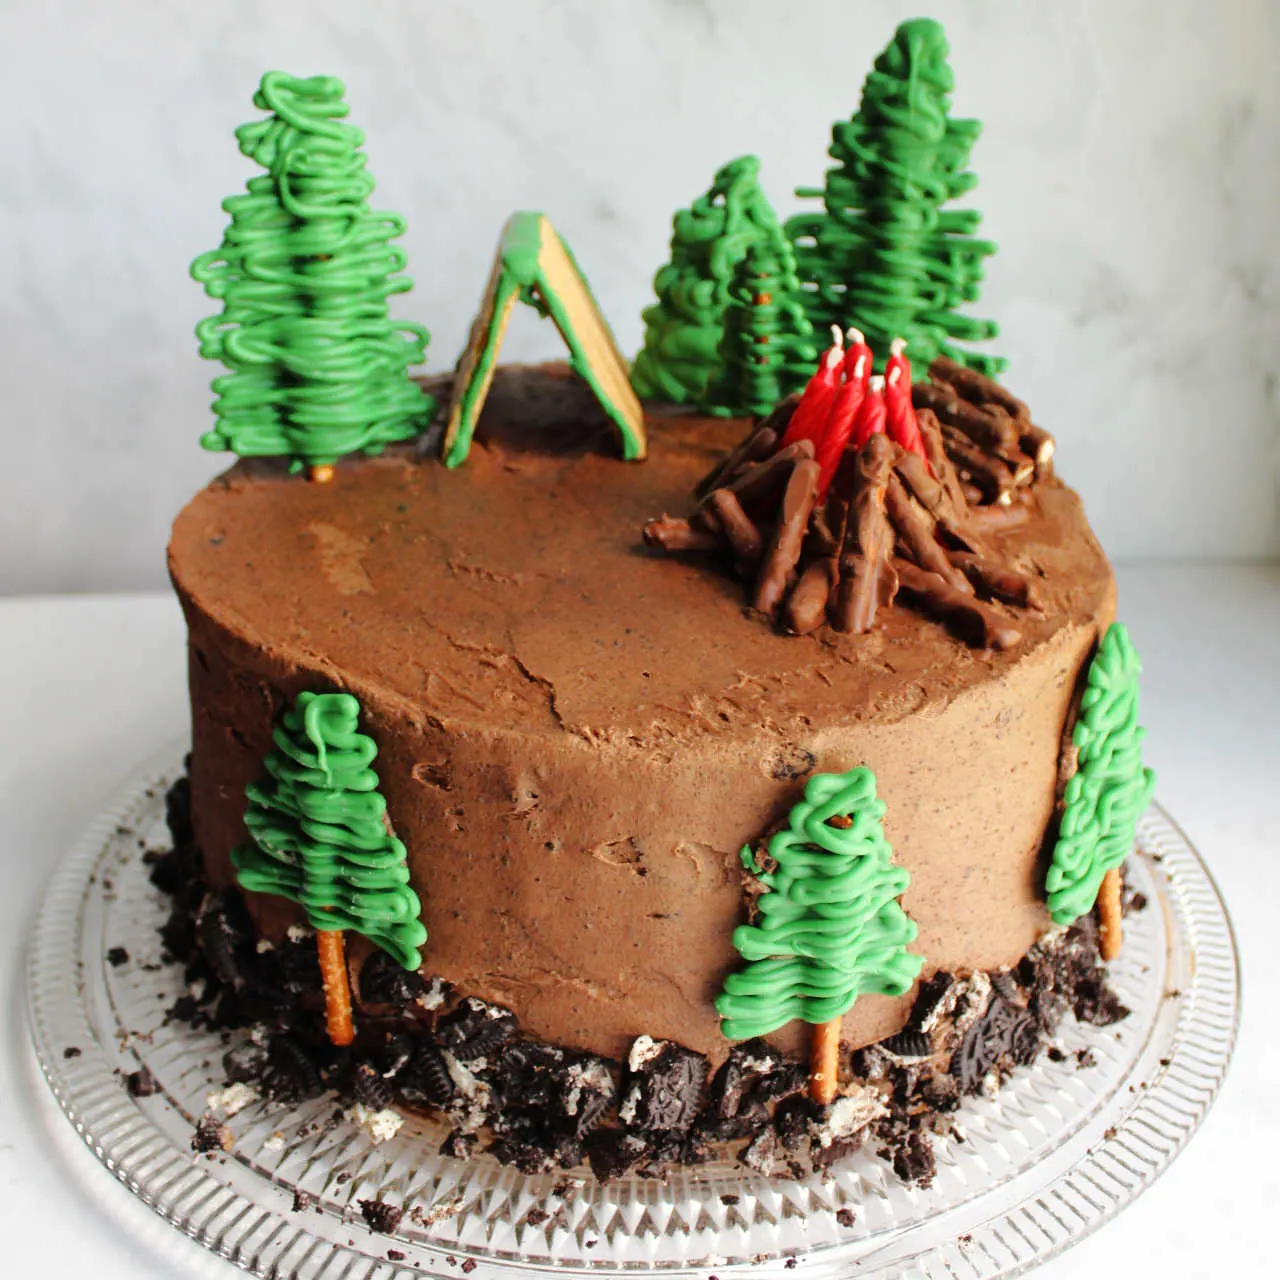 Camping cake with pretzel trees, a campfire candle arrangement and tent.